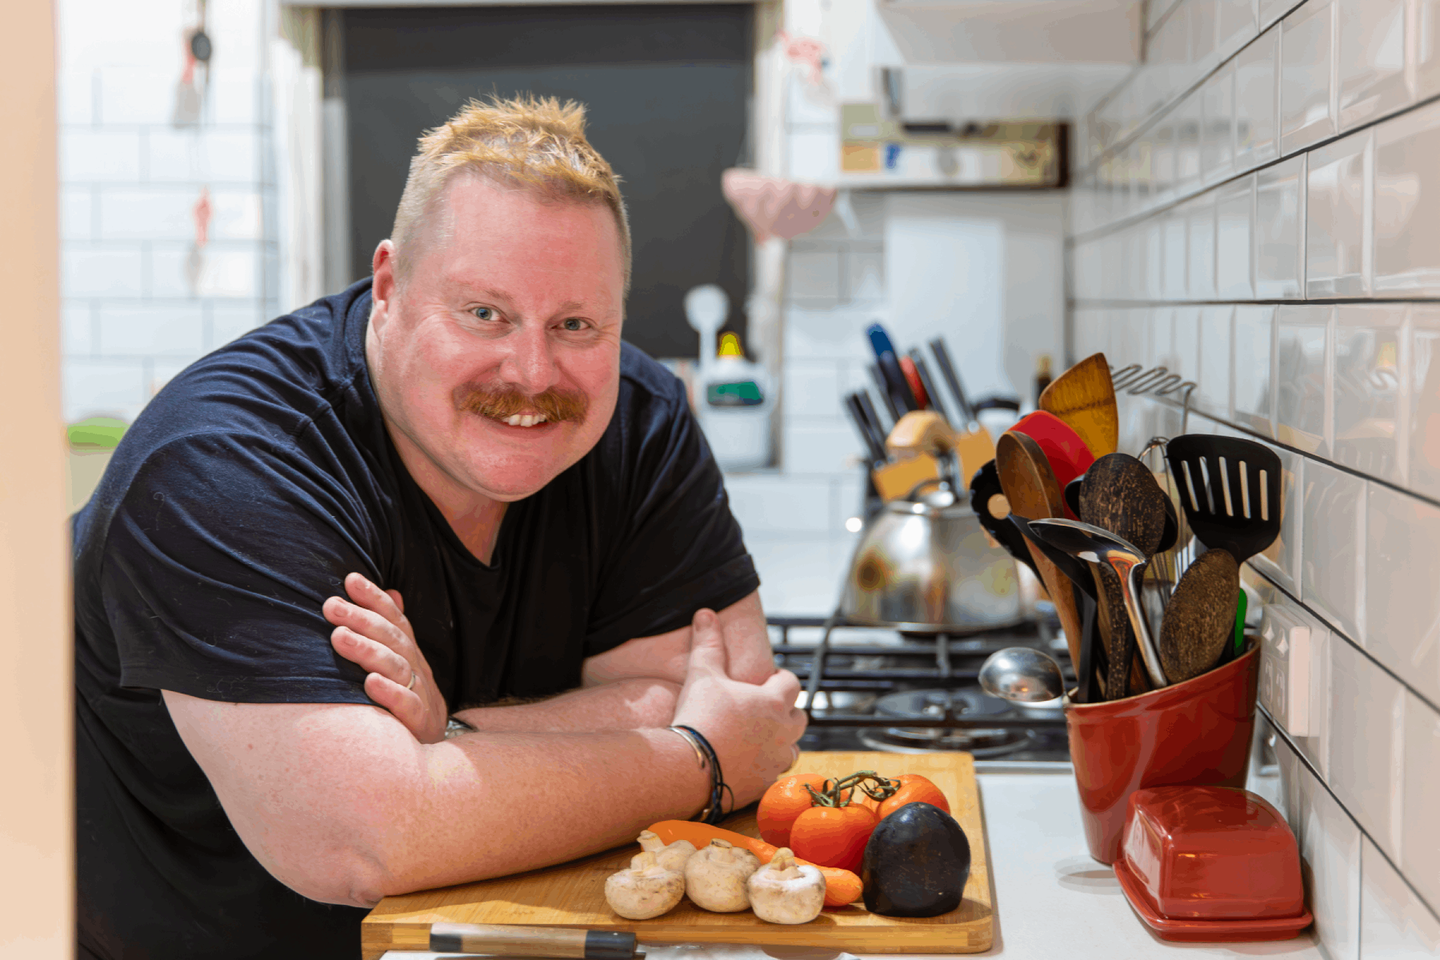 Man smiling with elbows on bench in front of food and cooking utensils